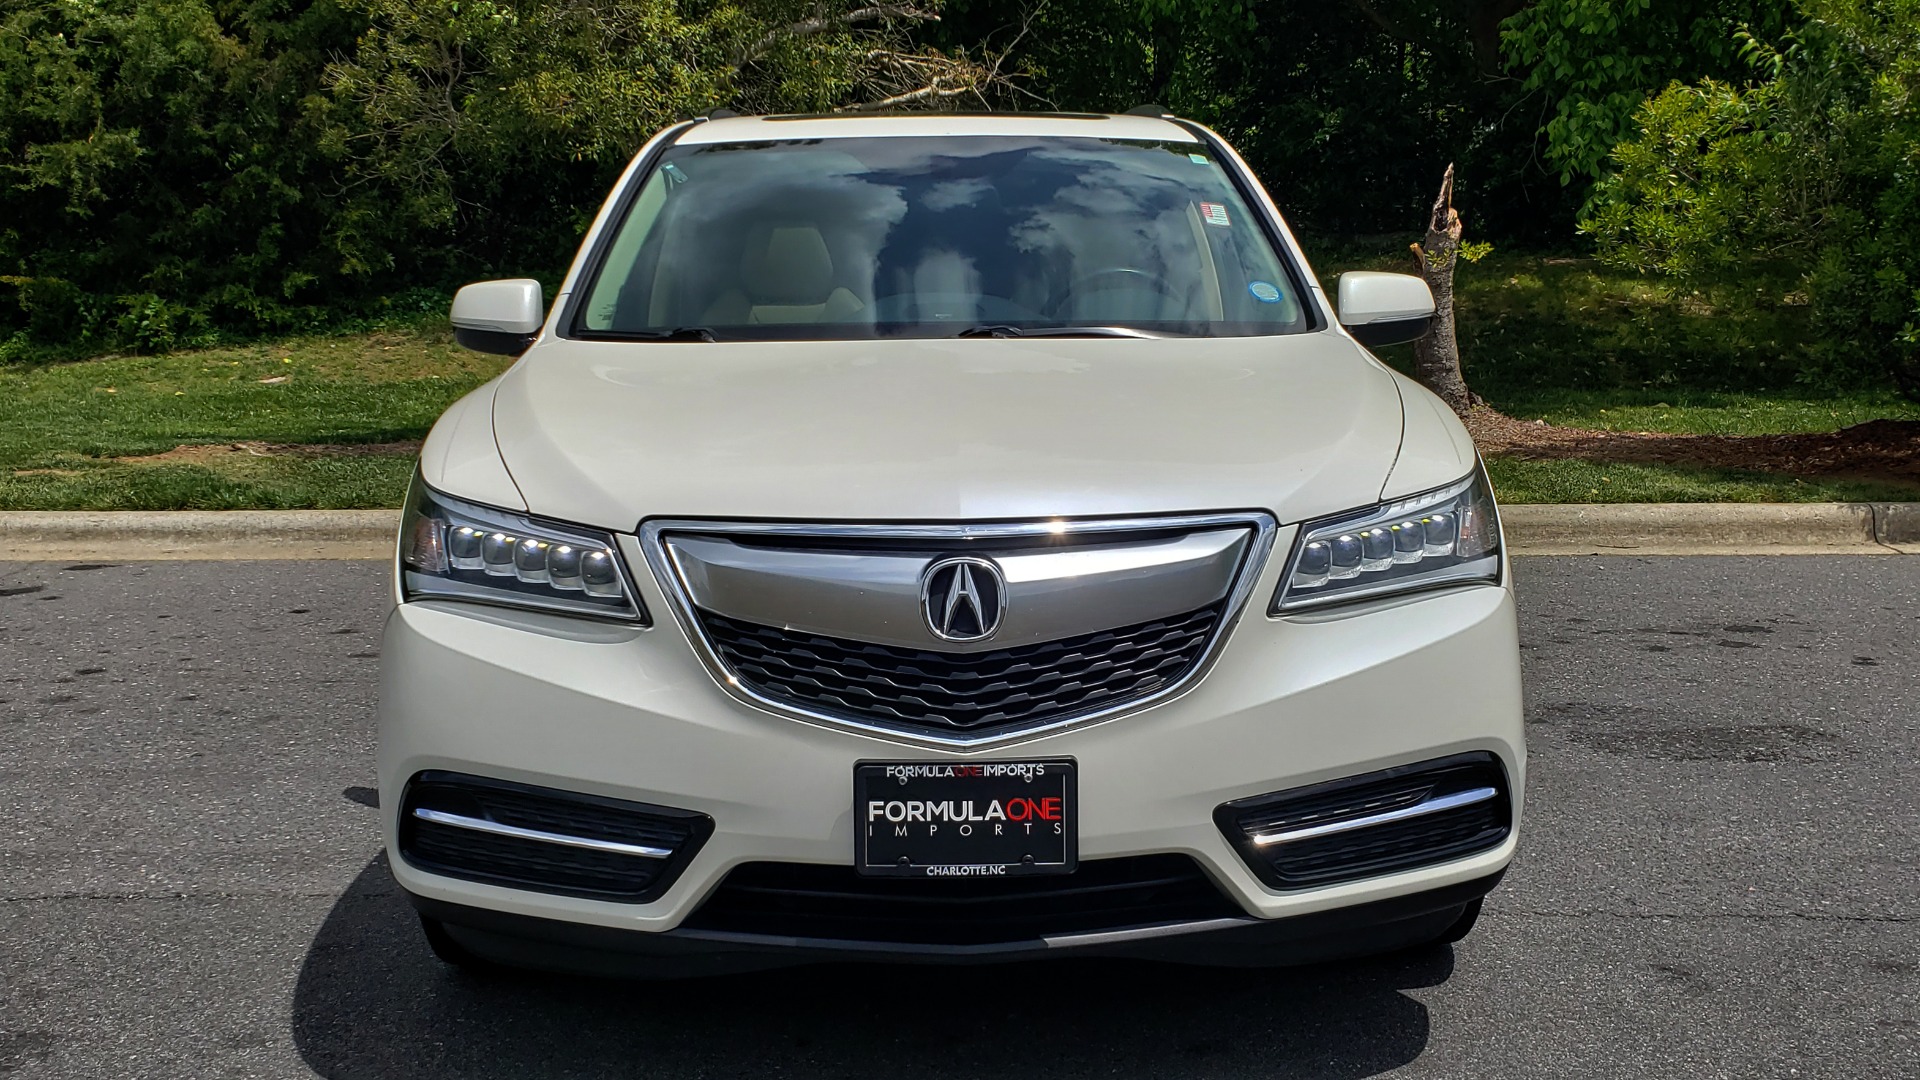 Used 2014 Acura MDX AWD / NAV / SUNROOF / 3-ROW / REARVIEW / PREMIUM SND for sale Sold at Formula Imports in Charlotte NC 28227 24